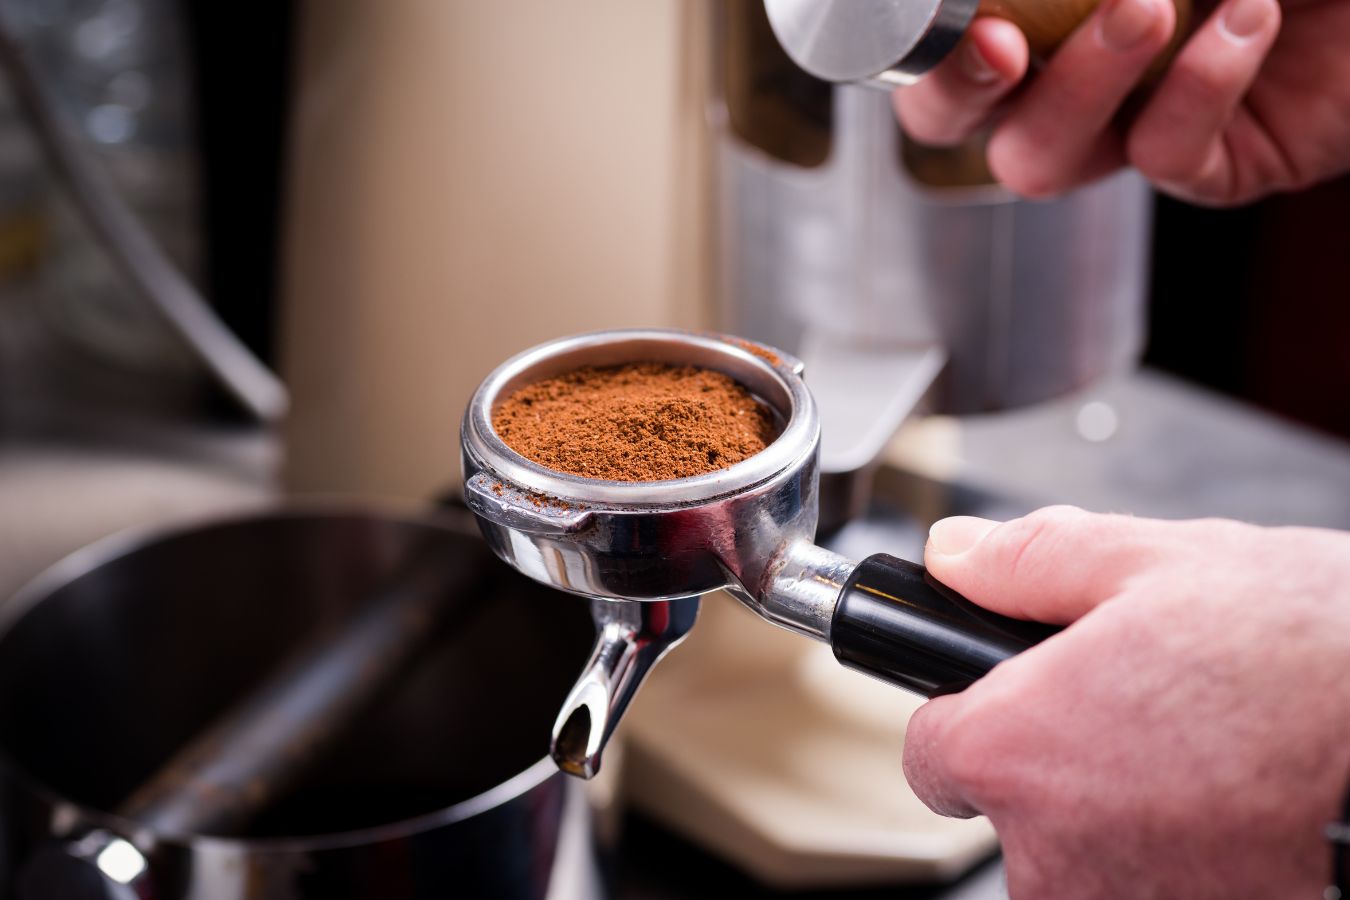 Full Flair Espresso Maker Review - Is it worth it